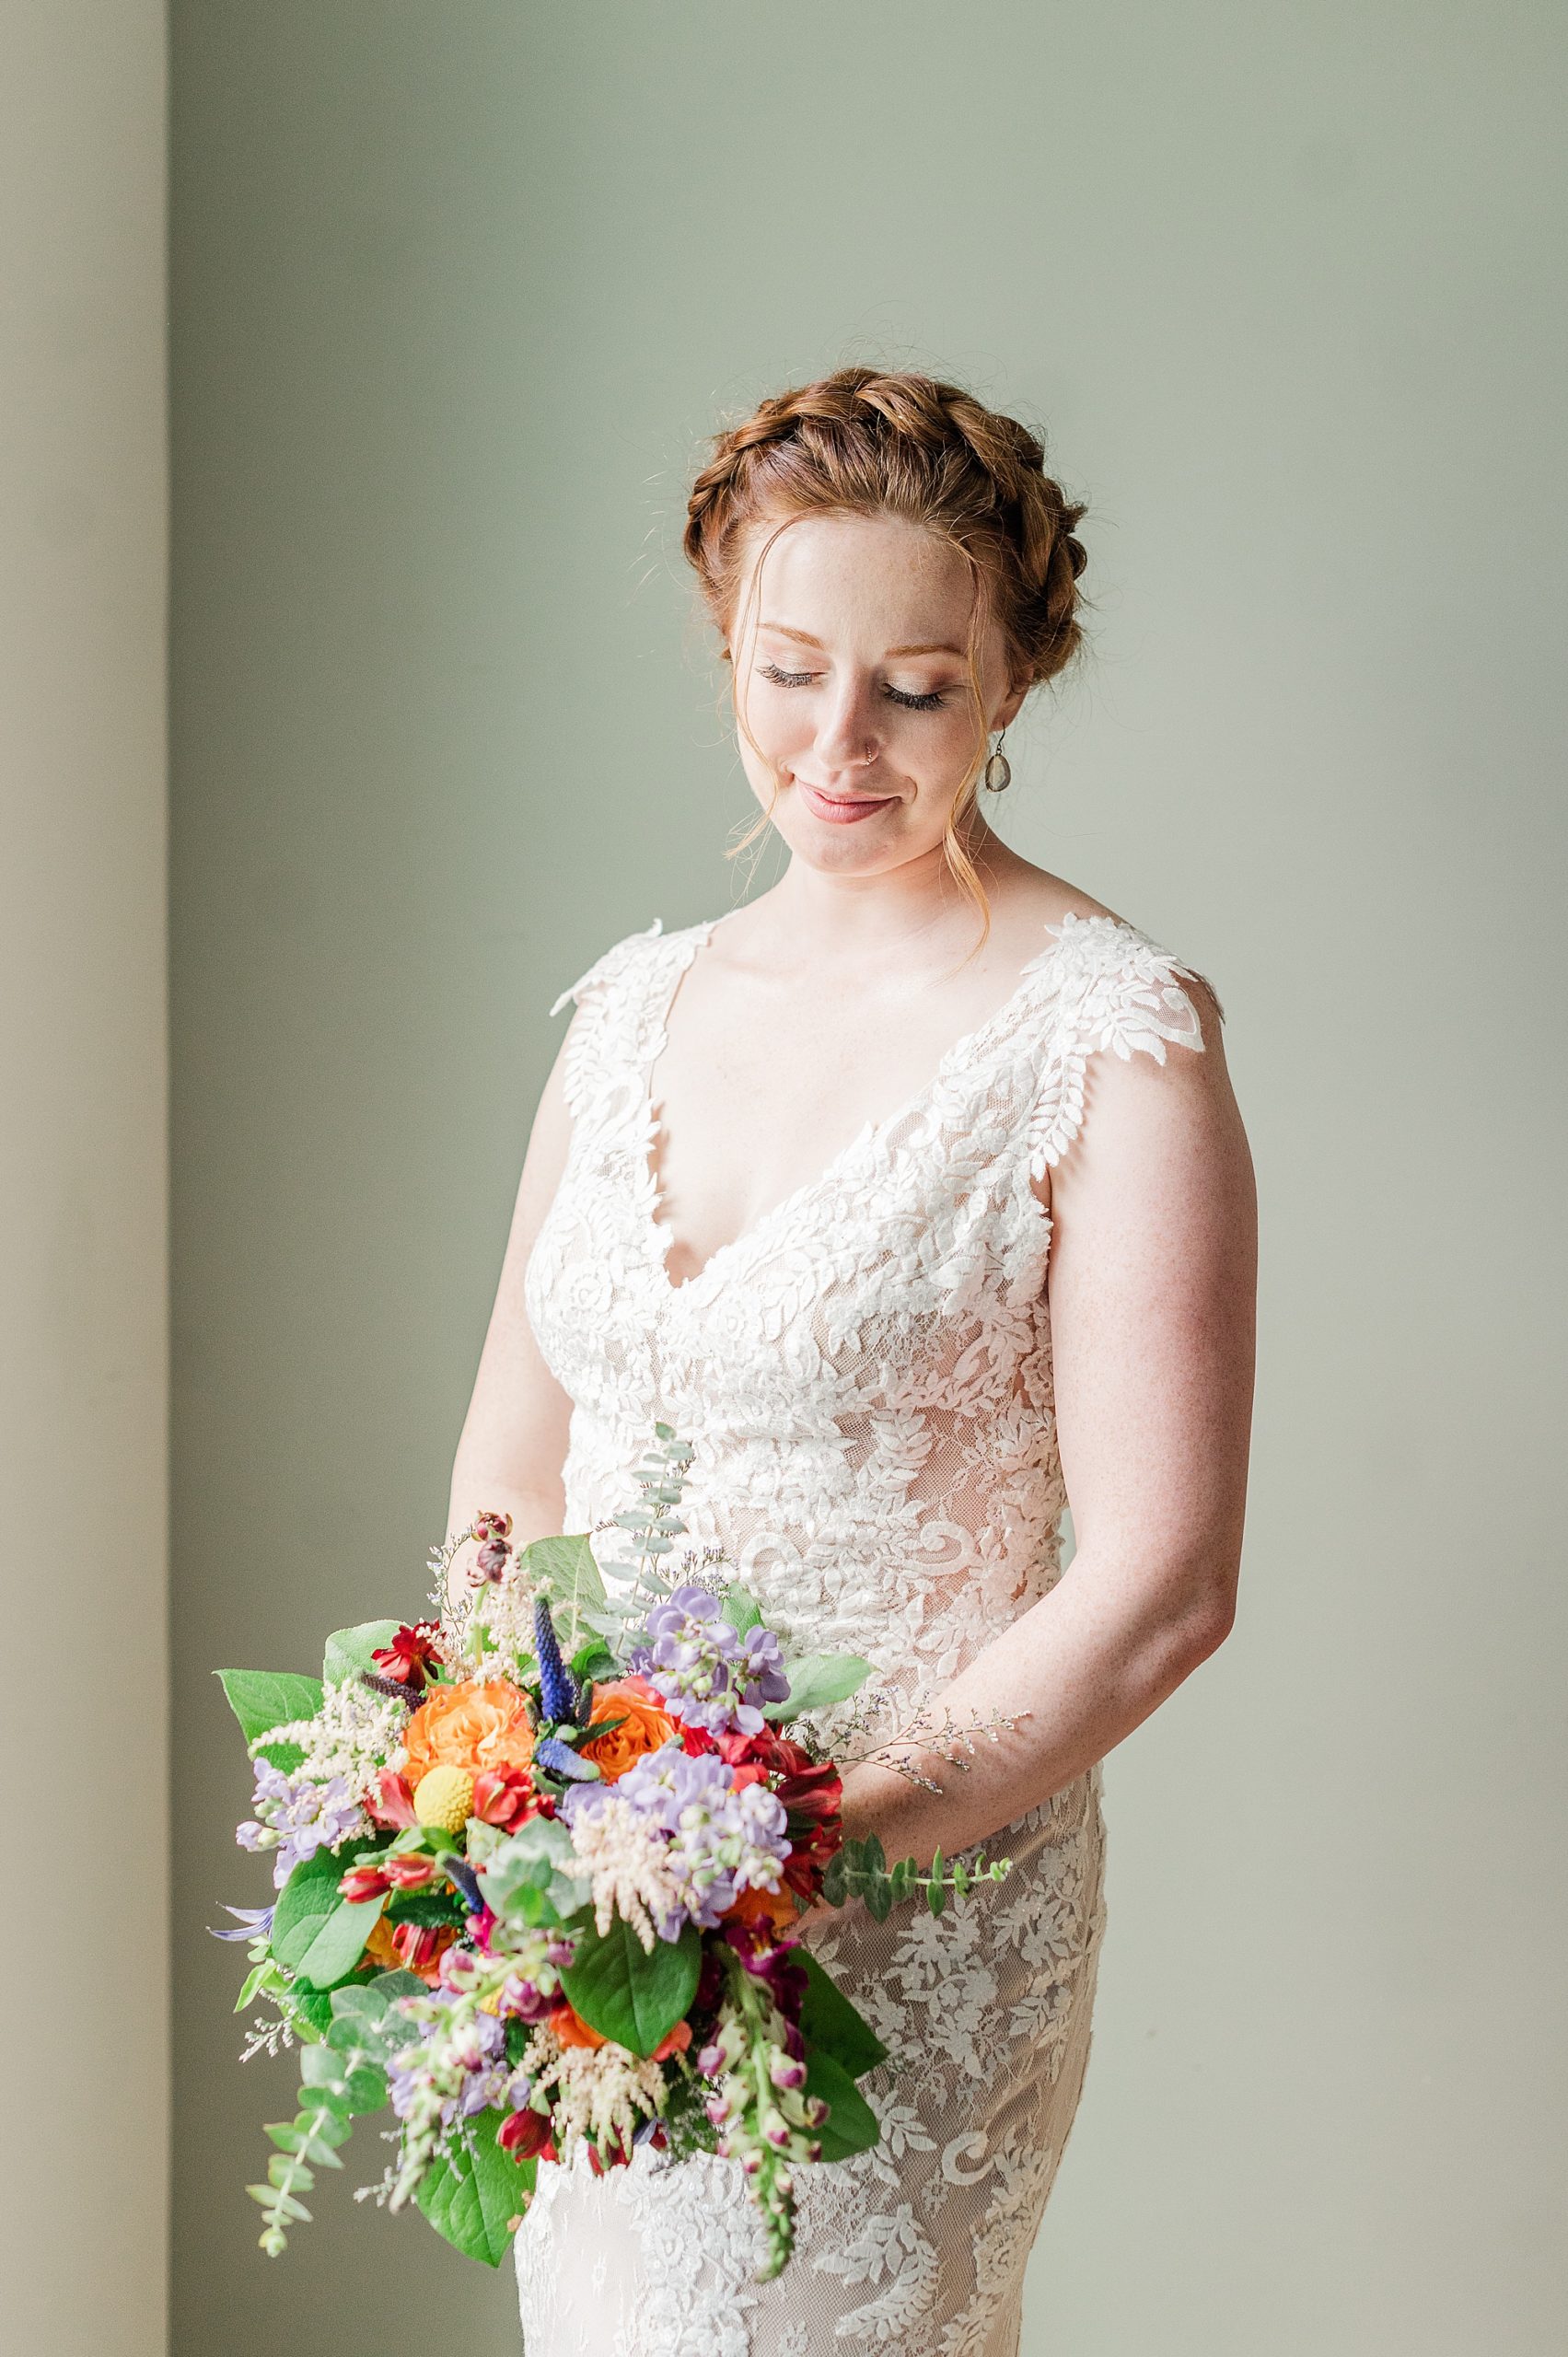 Bride Getting Ready Photos at Wedding at Virginia Tech. Wedding Photography by Kailey Brianne Photography